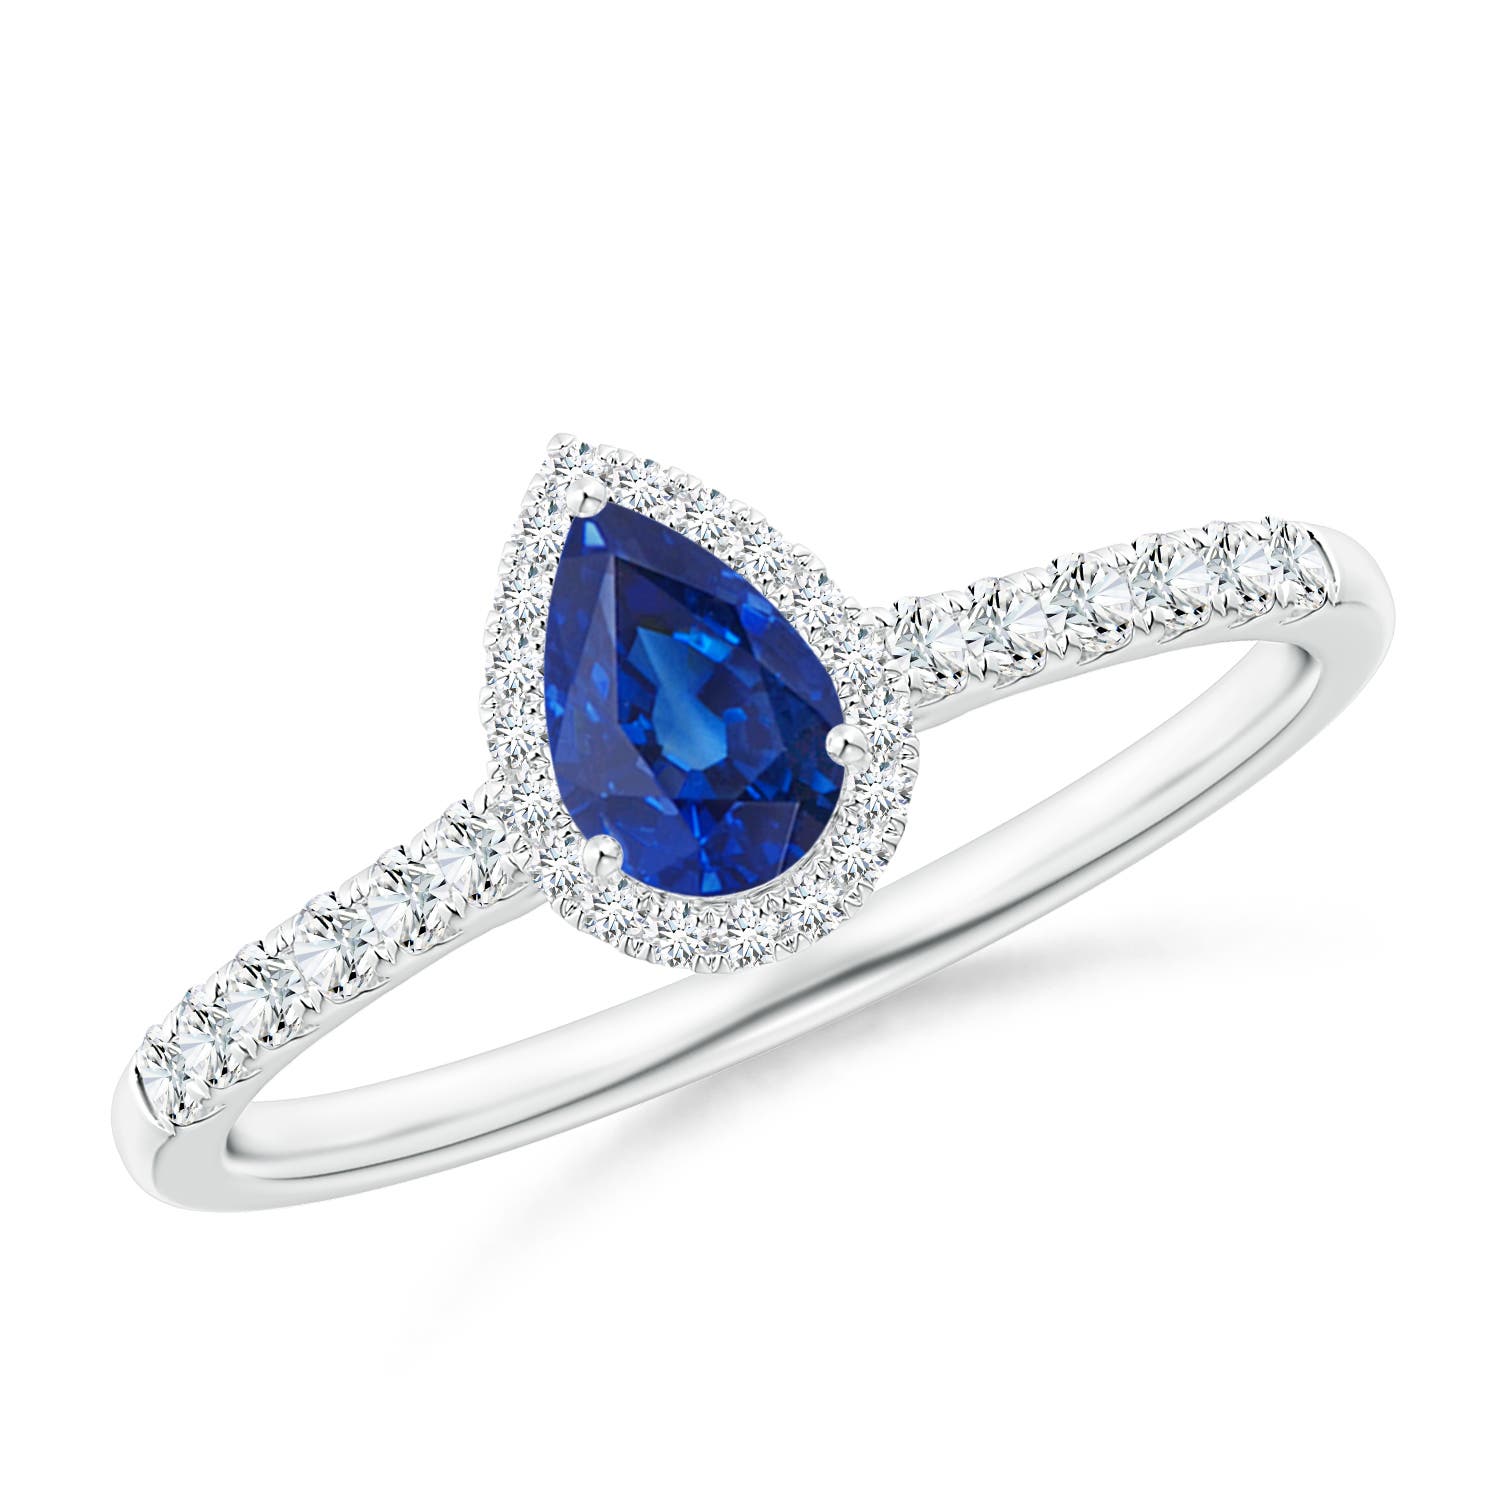 What Is the History and Origin of History of Blue Sapphire?